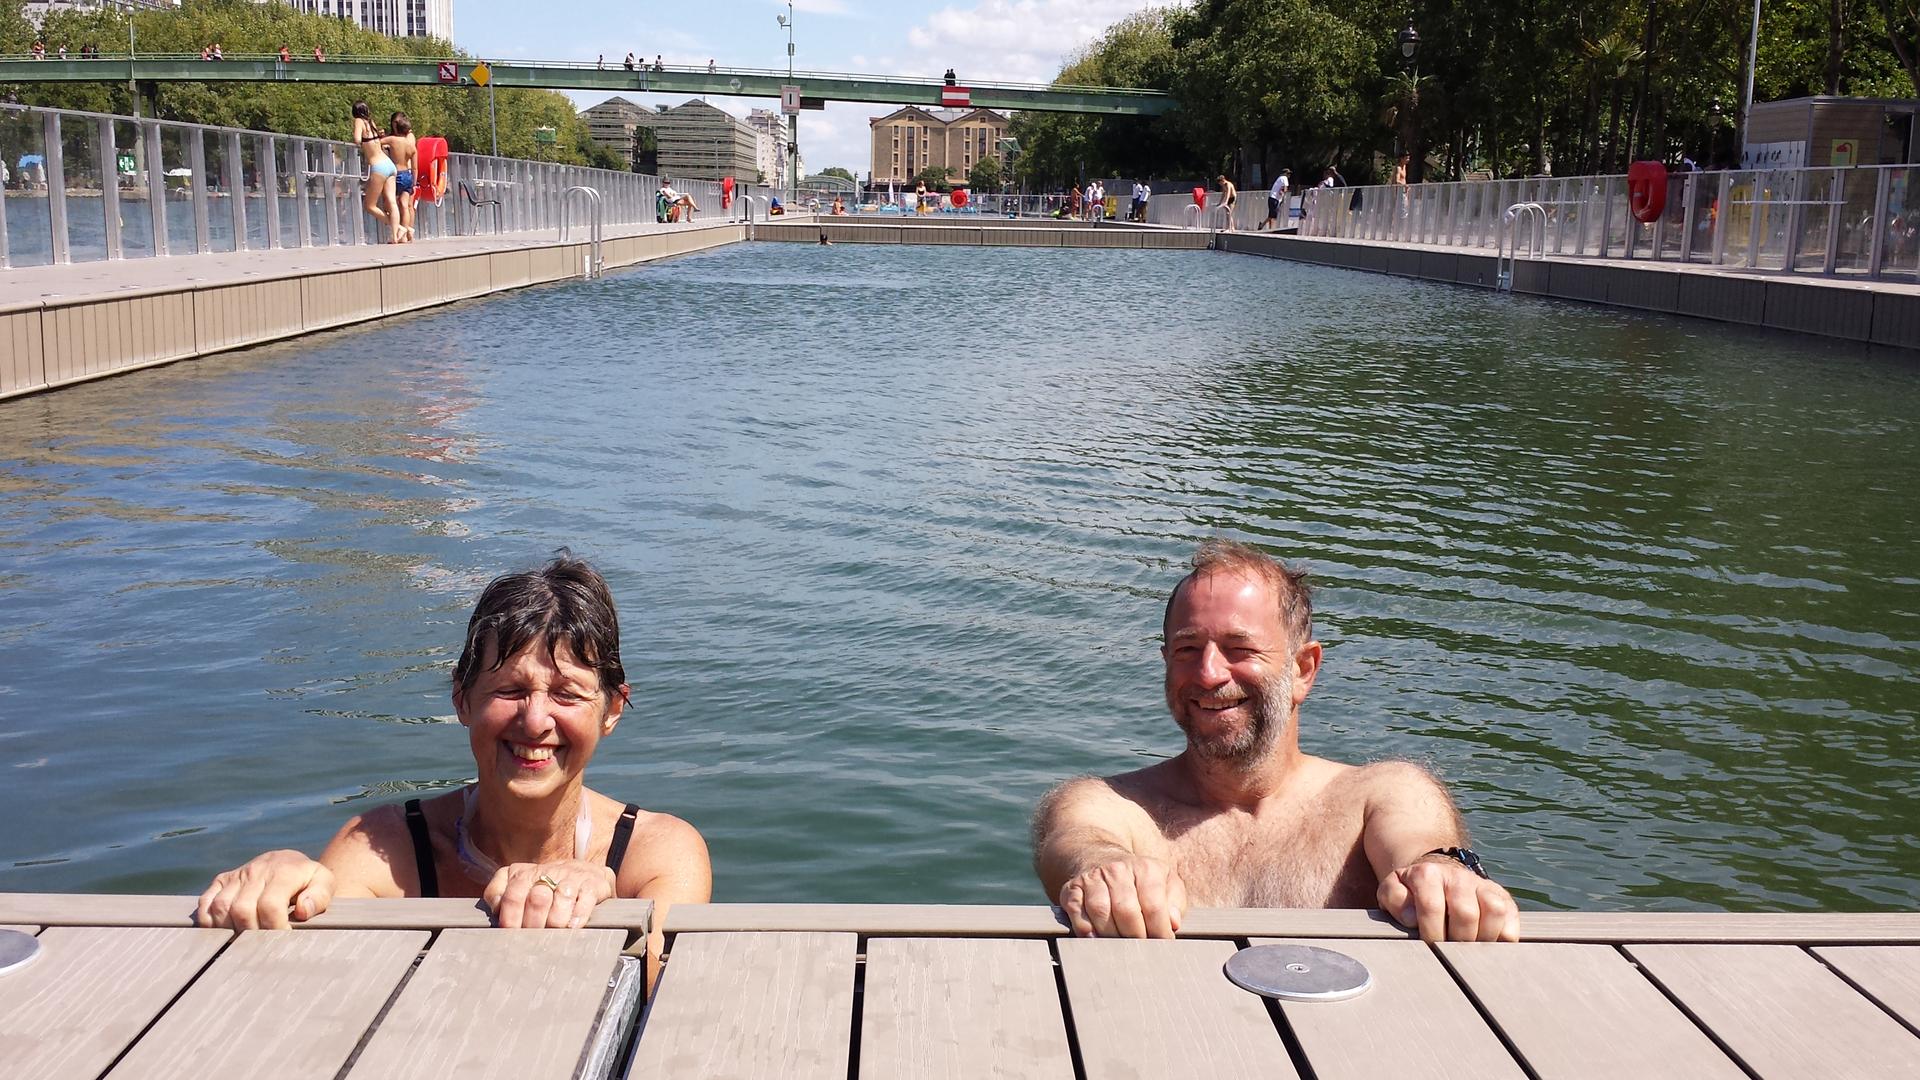 A man and woman beam up at the camera as they hold onto the edge of the pool.